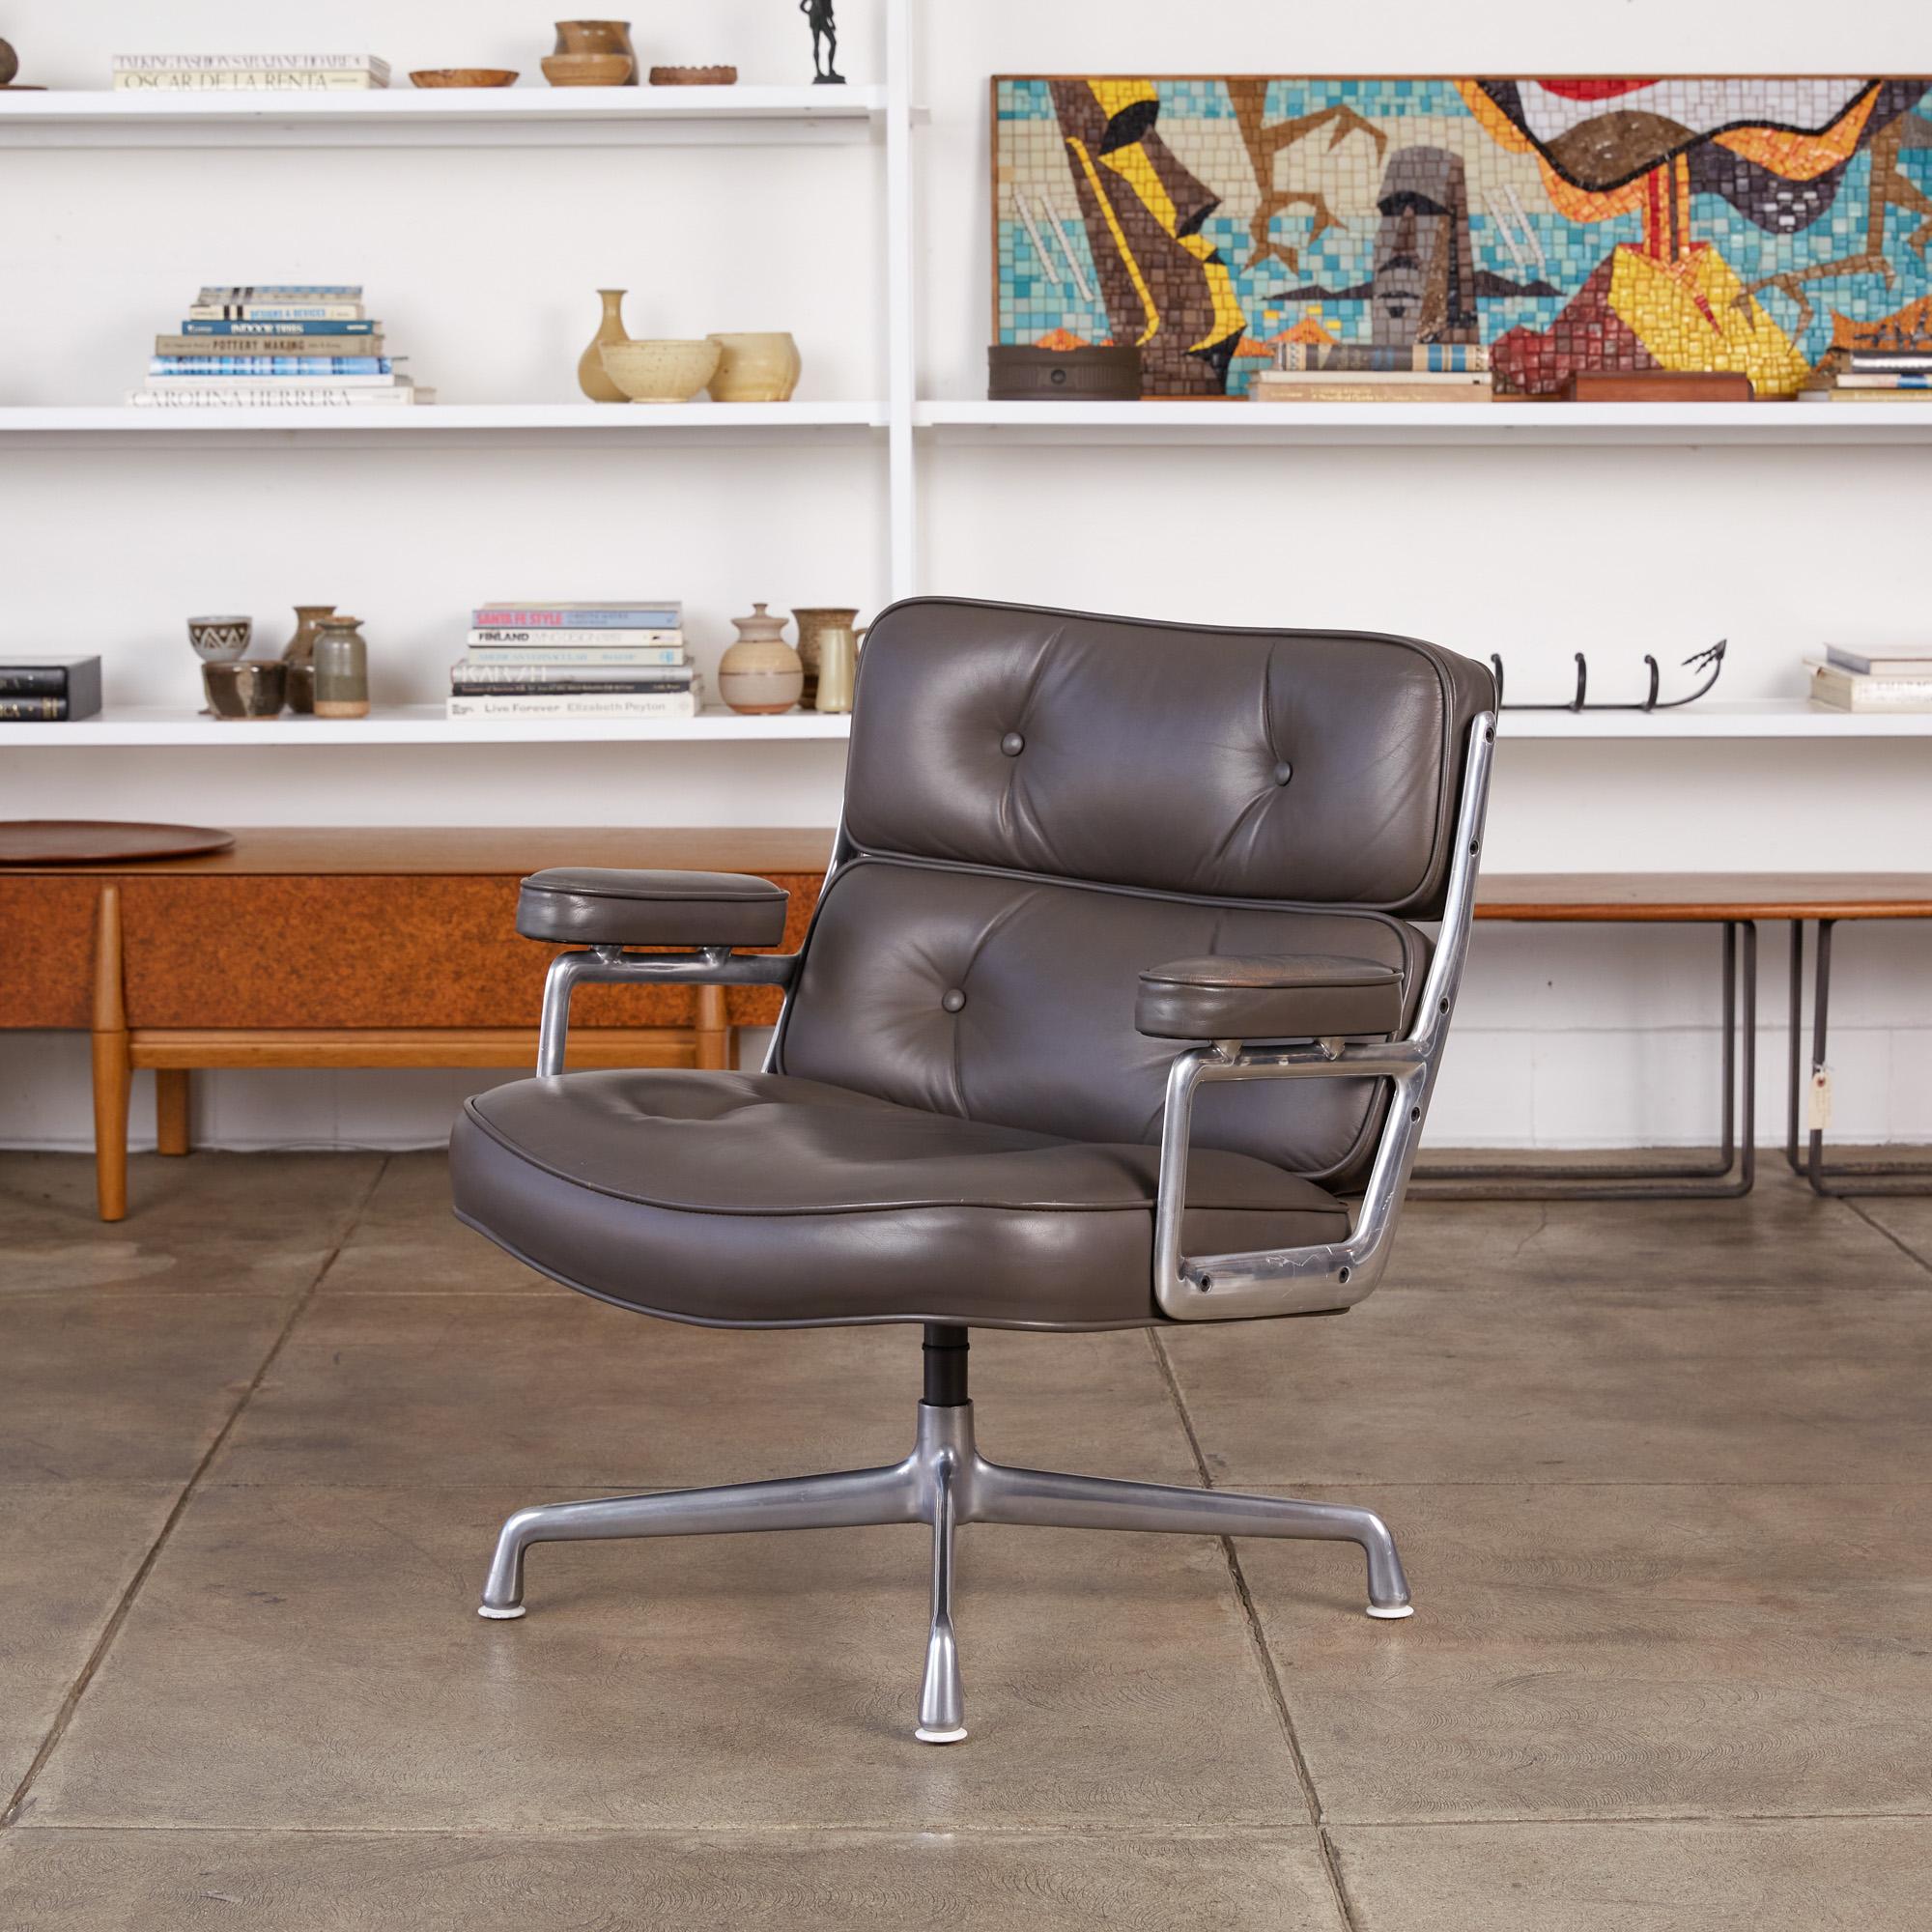 A legendary office design by Ray and Charles Eames for the three modernist lobbies of the new Time Life Building in Manhattan, the Time Life lobby chair has a polished aluminum frame and segmented, tufted cushions in leather upholstery. Leather